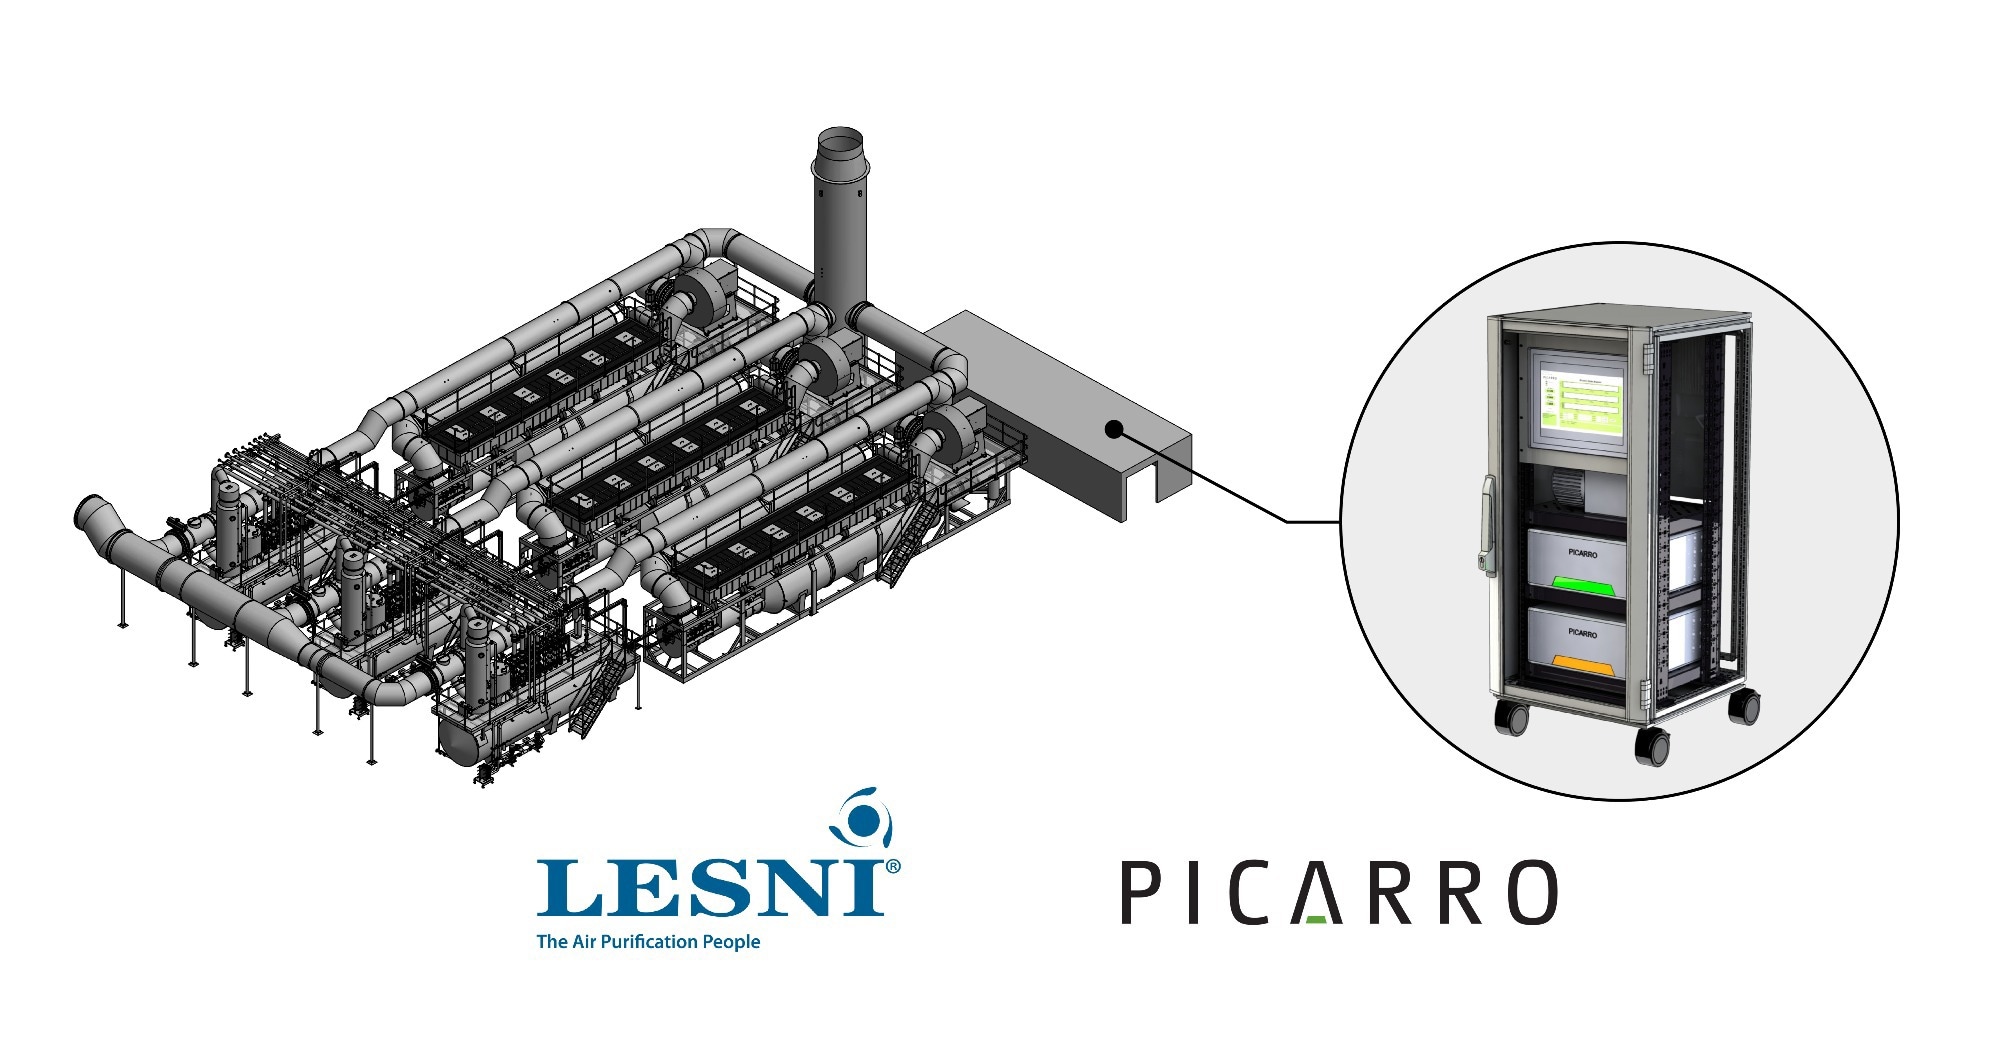 The combination of LESNI’s abatement solutions and Picarro’s Continuous Emission Monitoring Systems (CEMS) for Ethylene Oxide enable sterilization facilities to reduce emissions and mitigate regulatory risk